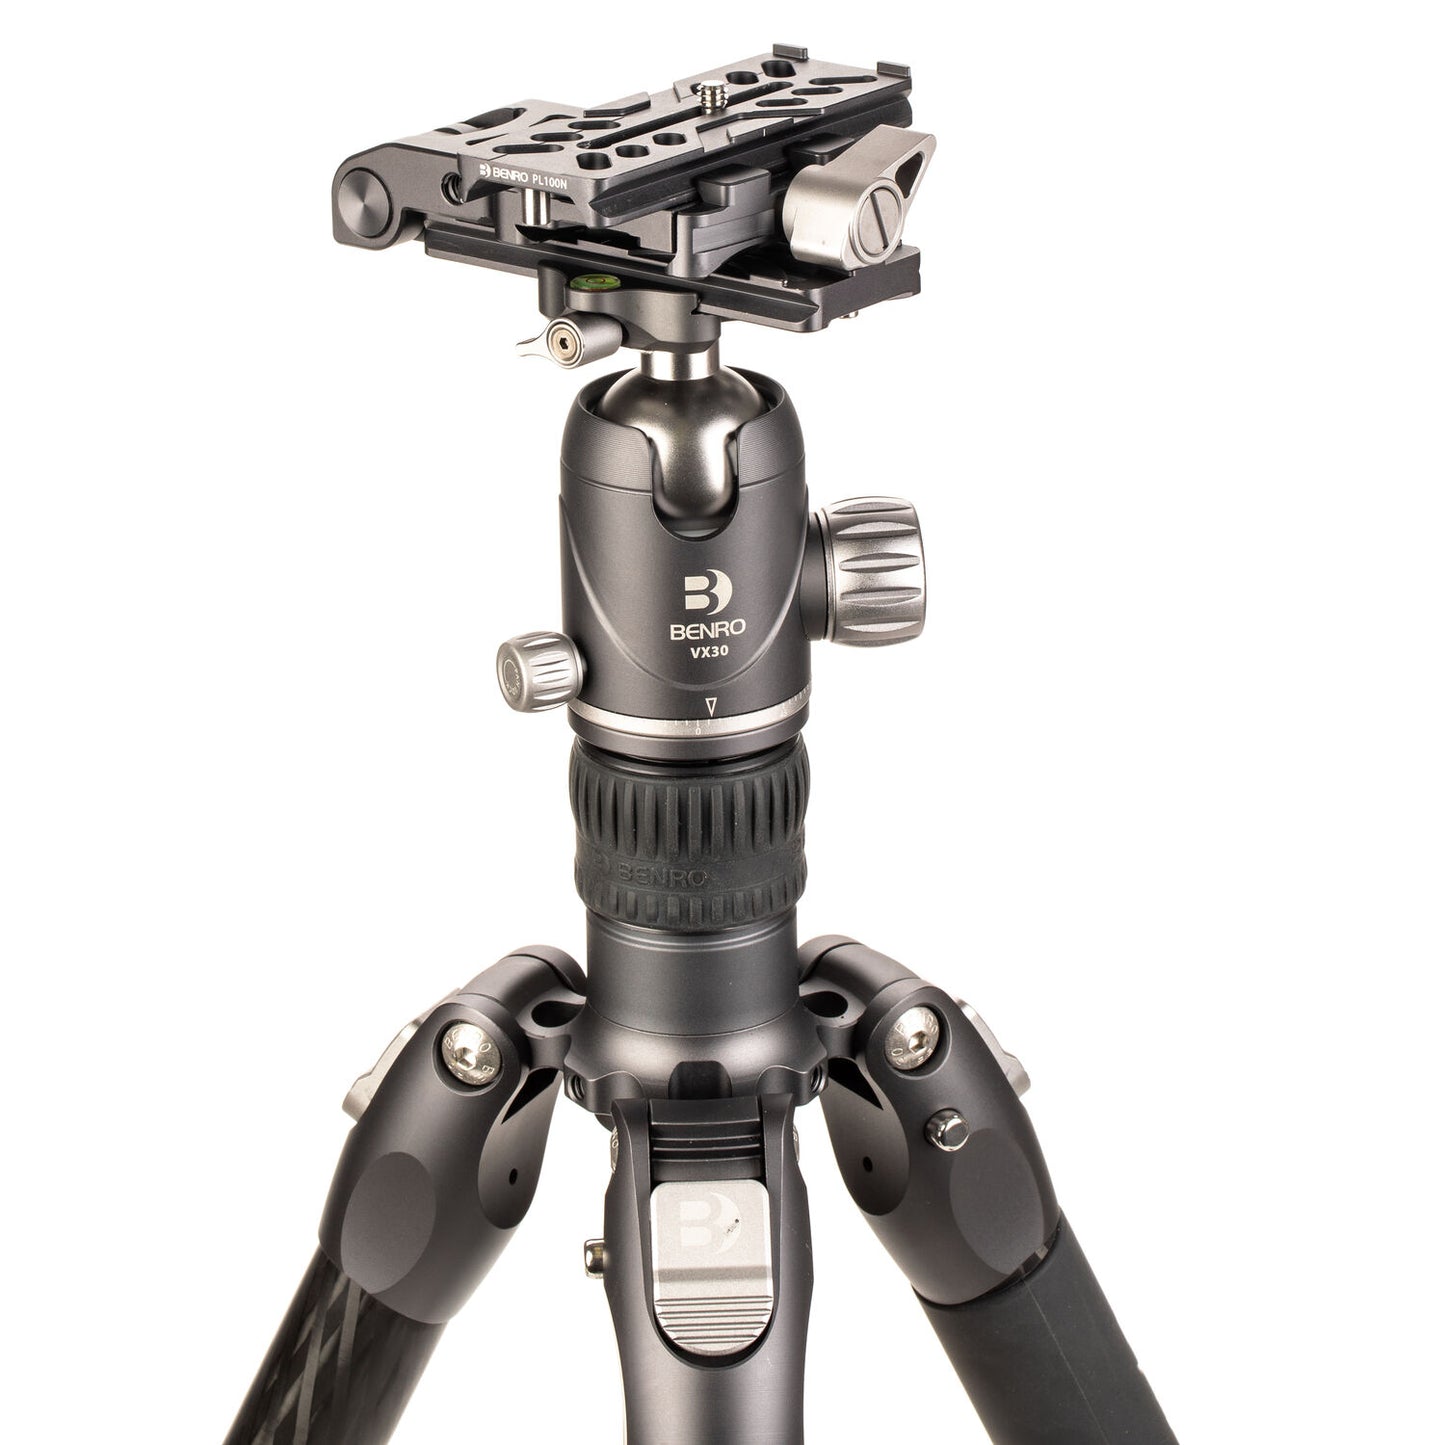 Benro TTOR35CLVGH2F Carbon Fiber Tripod Lightweight with GH2F Folding Gimbal Head and 10kg Load Capacity